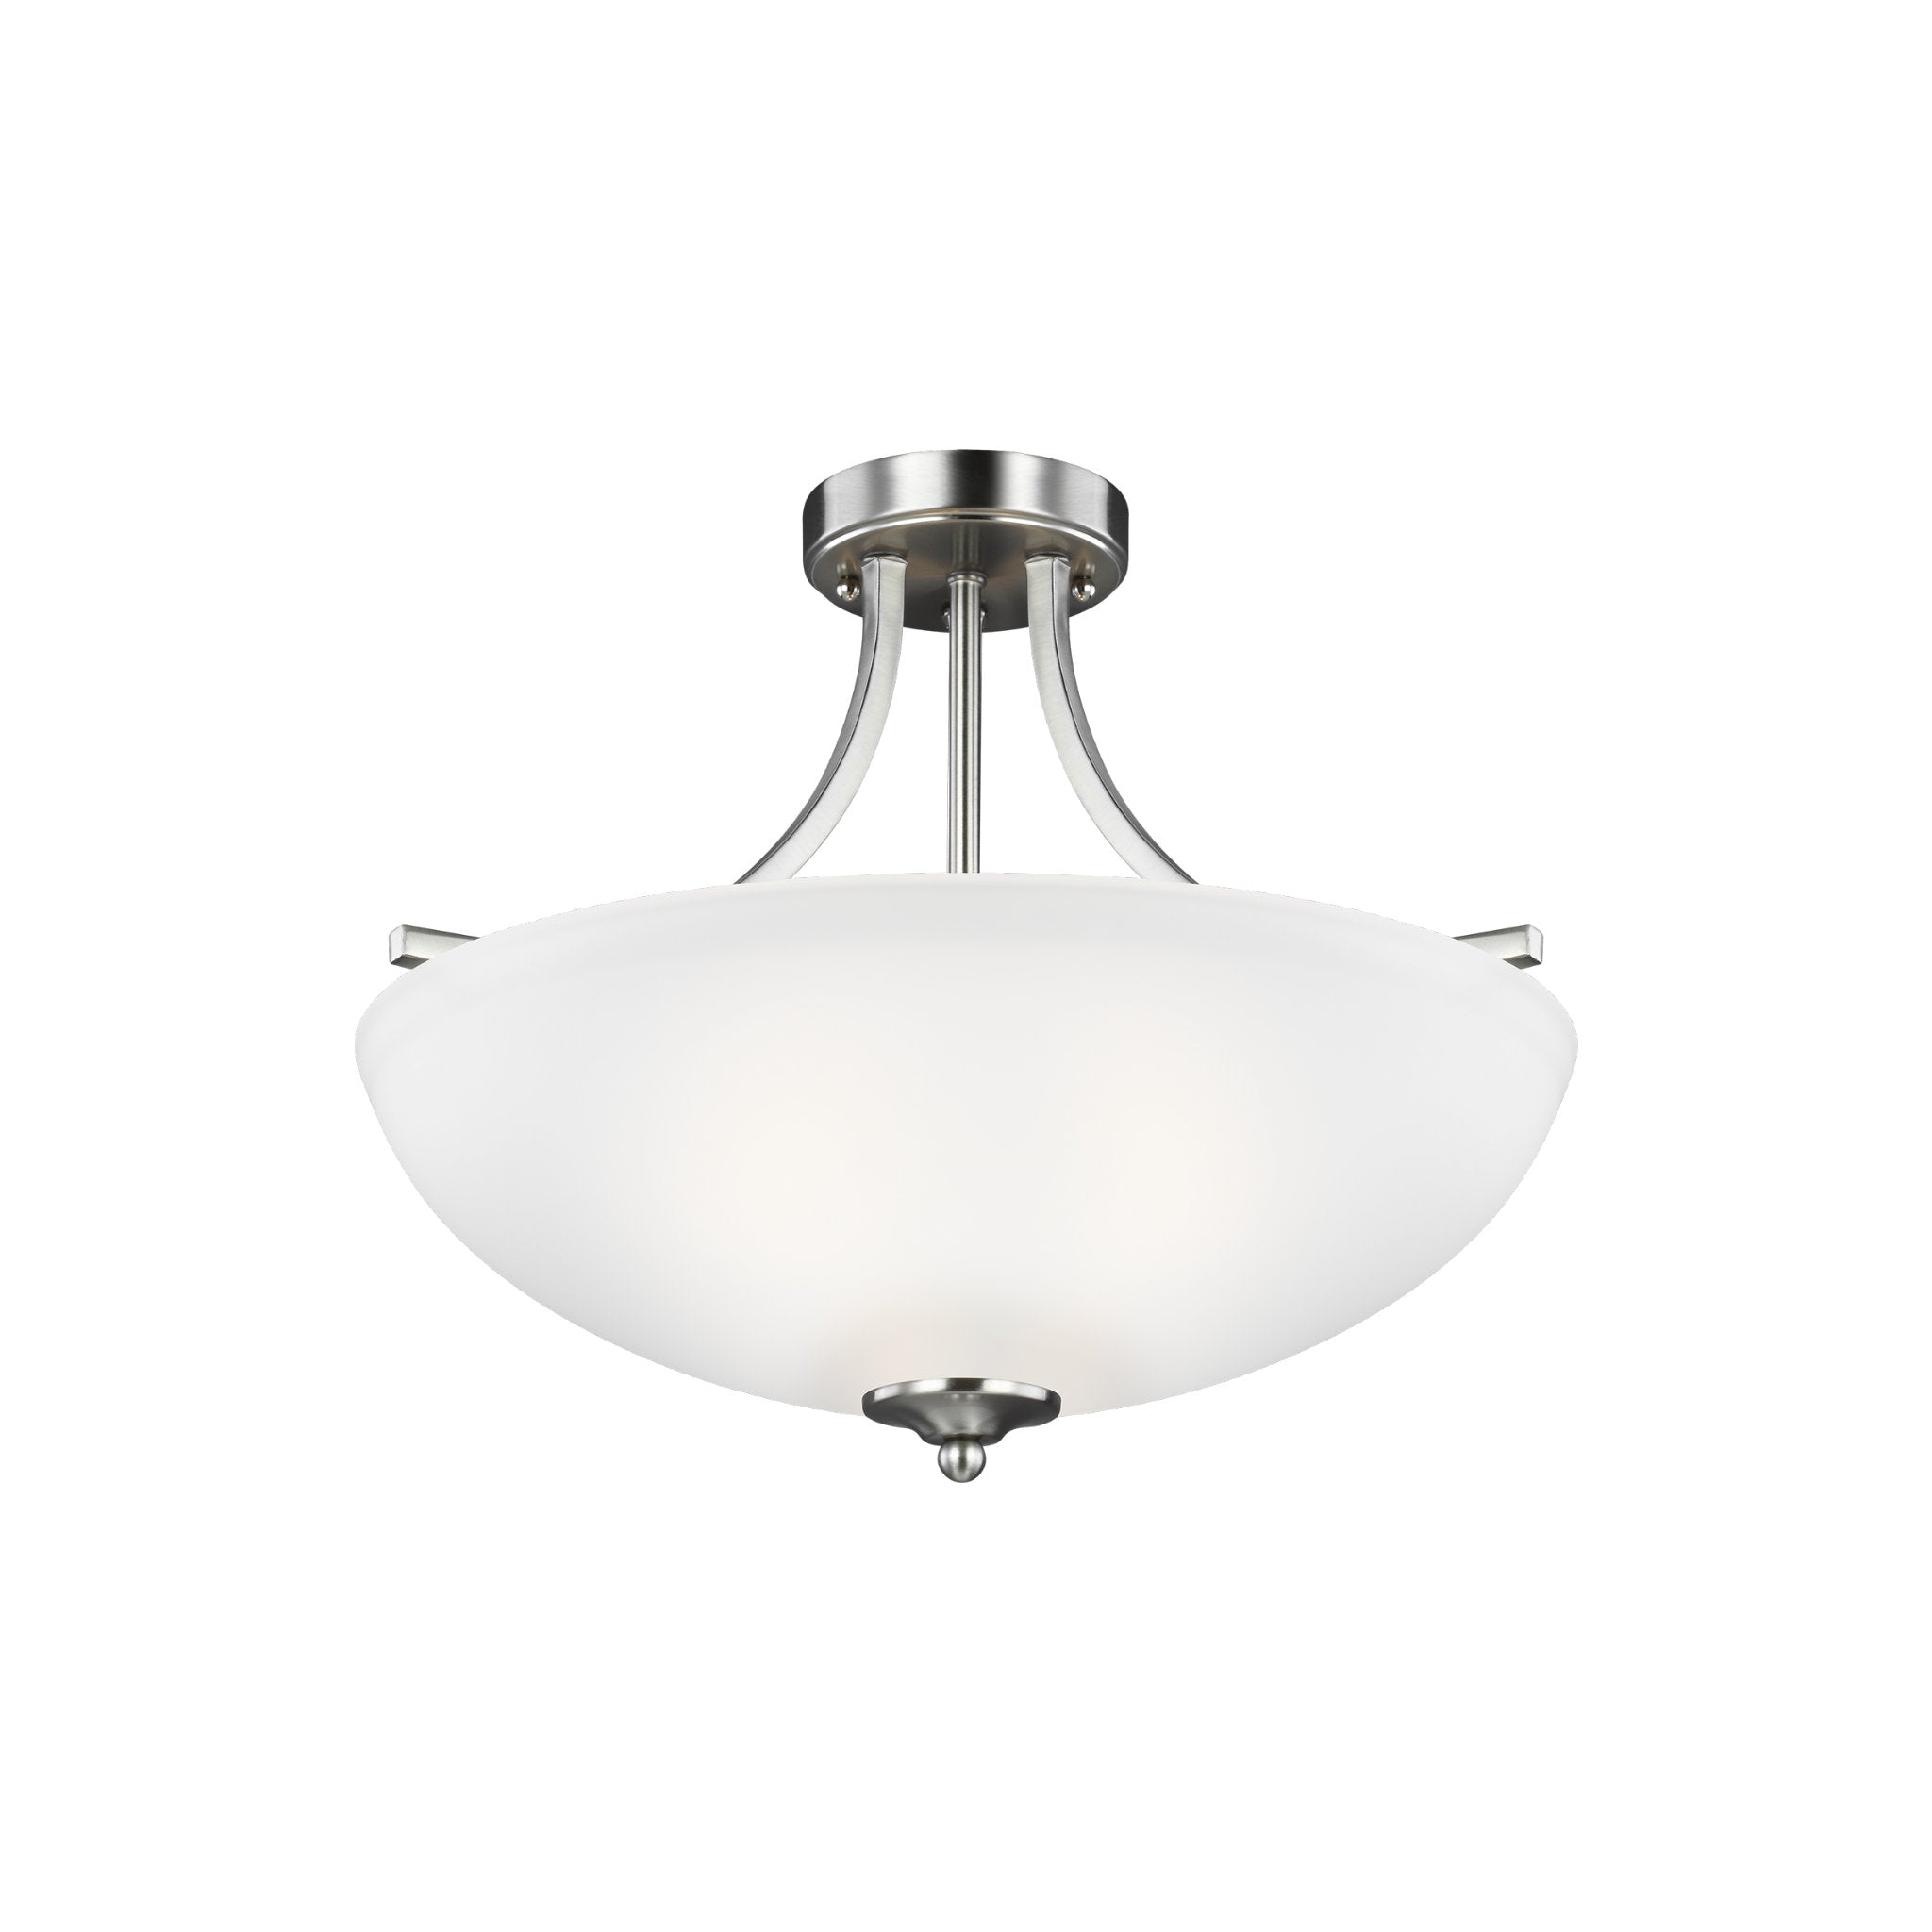 Geary Medium Three Light Semi-Flush Convertible Pendant Transitional Ceiling Fixture 16.375" Height Steel Round Satin Etched Shade in Brushed Nickel